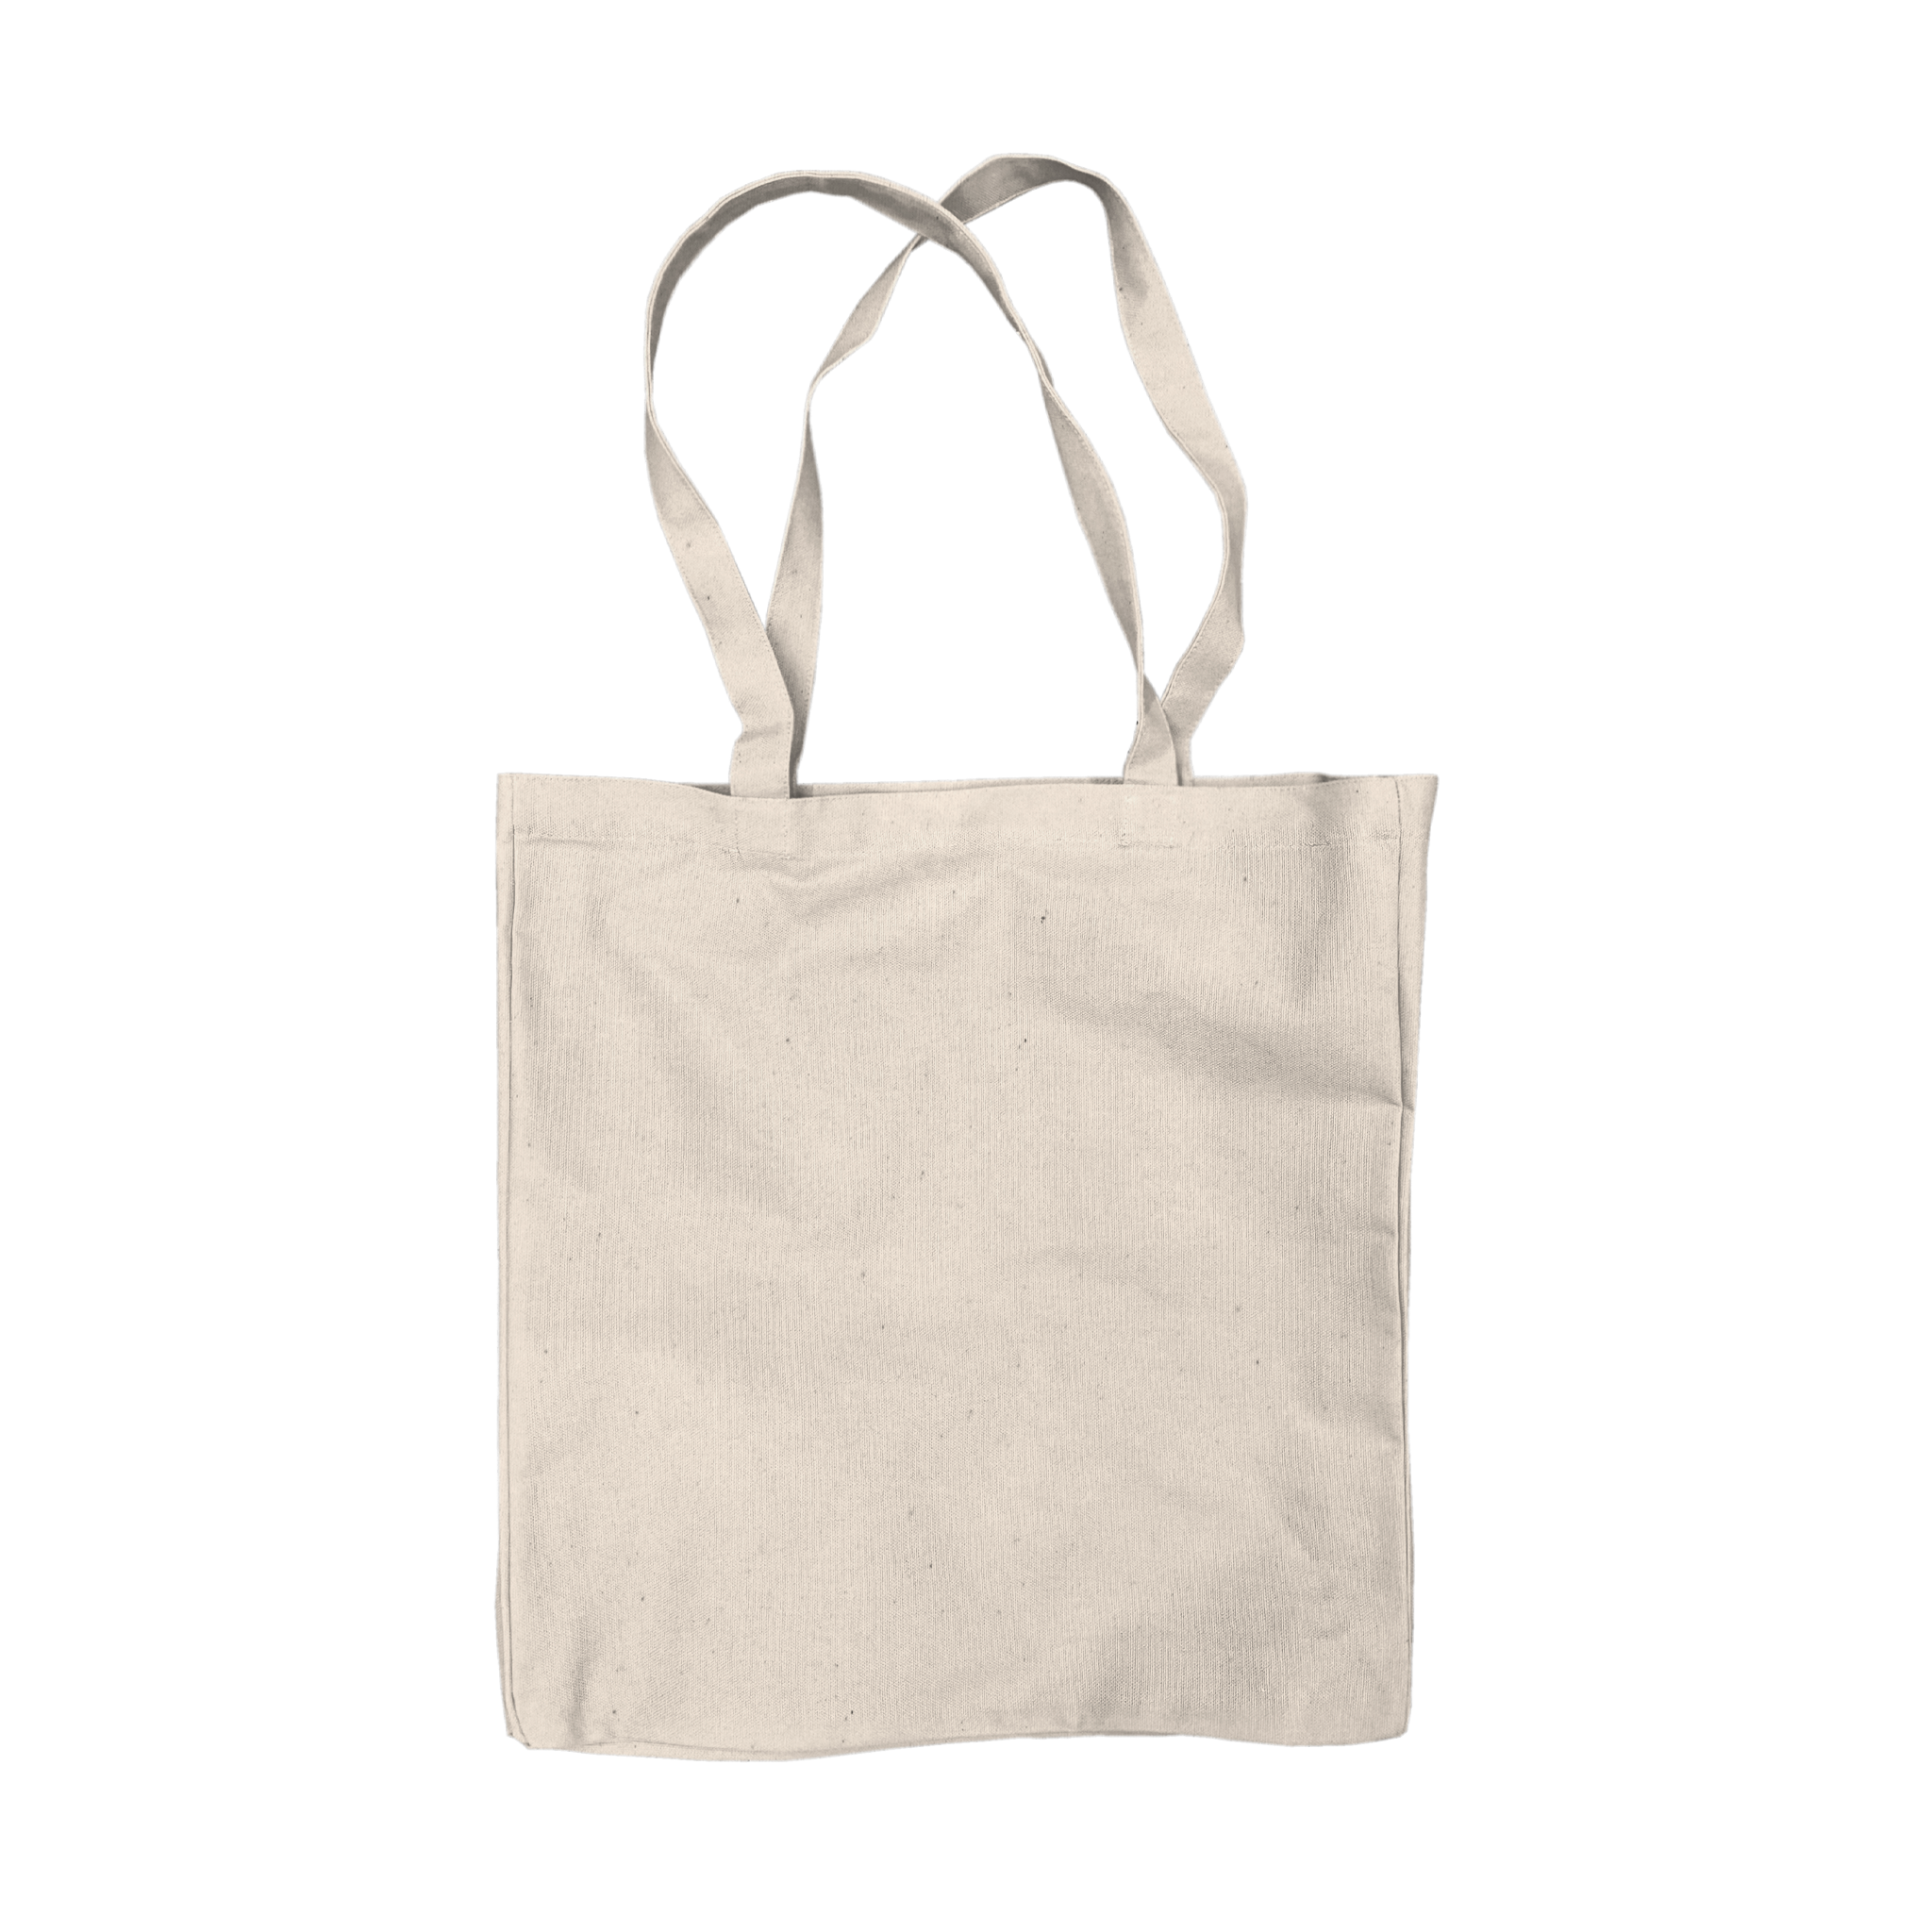 Juvale Set of 24 Bulk Blank Cotton Canvas Tote Bags for DIY Crafts, 13 x 11.5 Inches